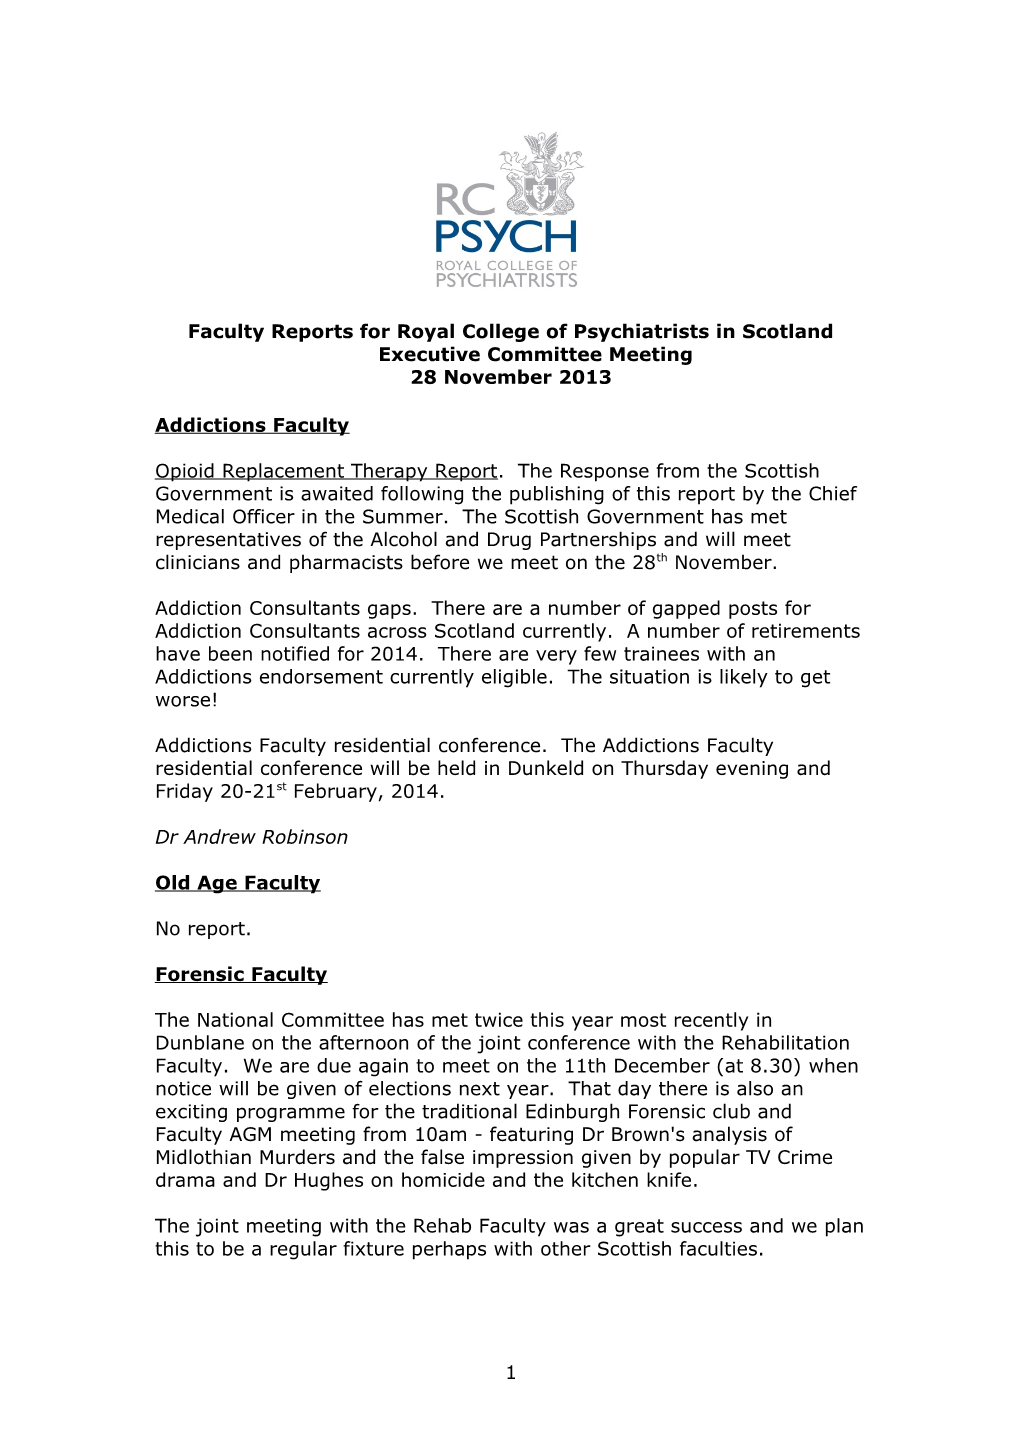 Faculty Reports for Royal College of Psychiatrists in Scotland Executive Committee Meeting